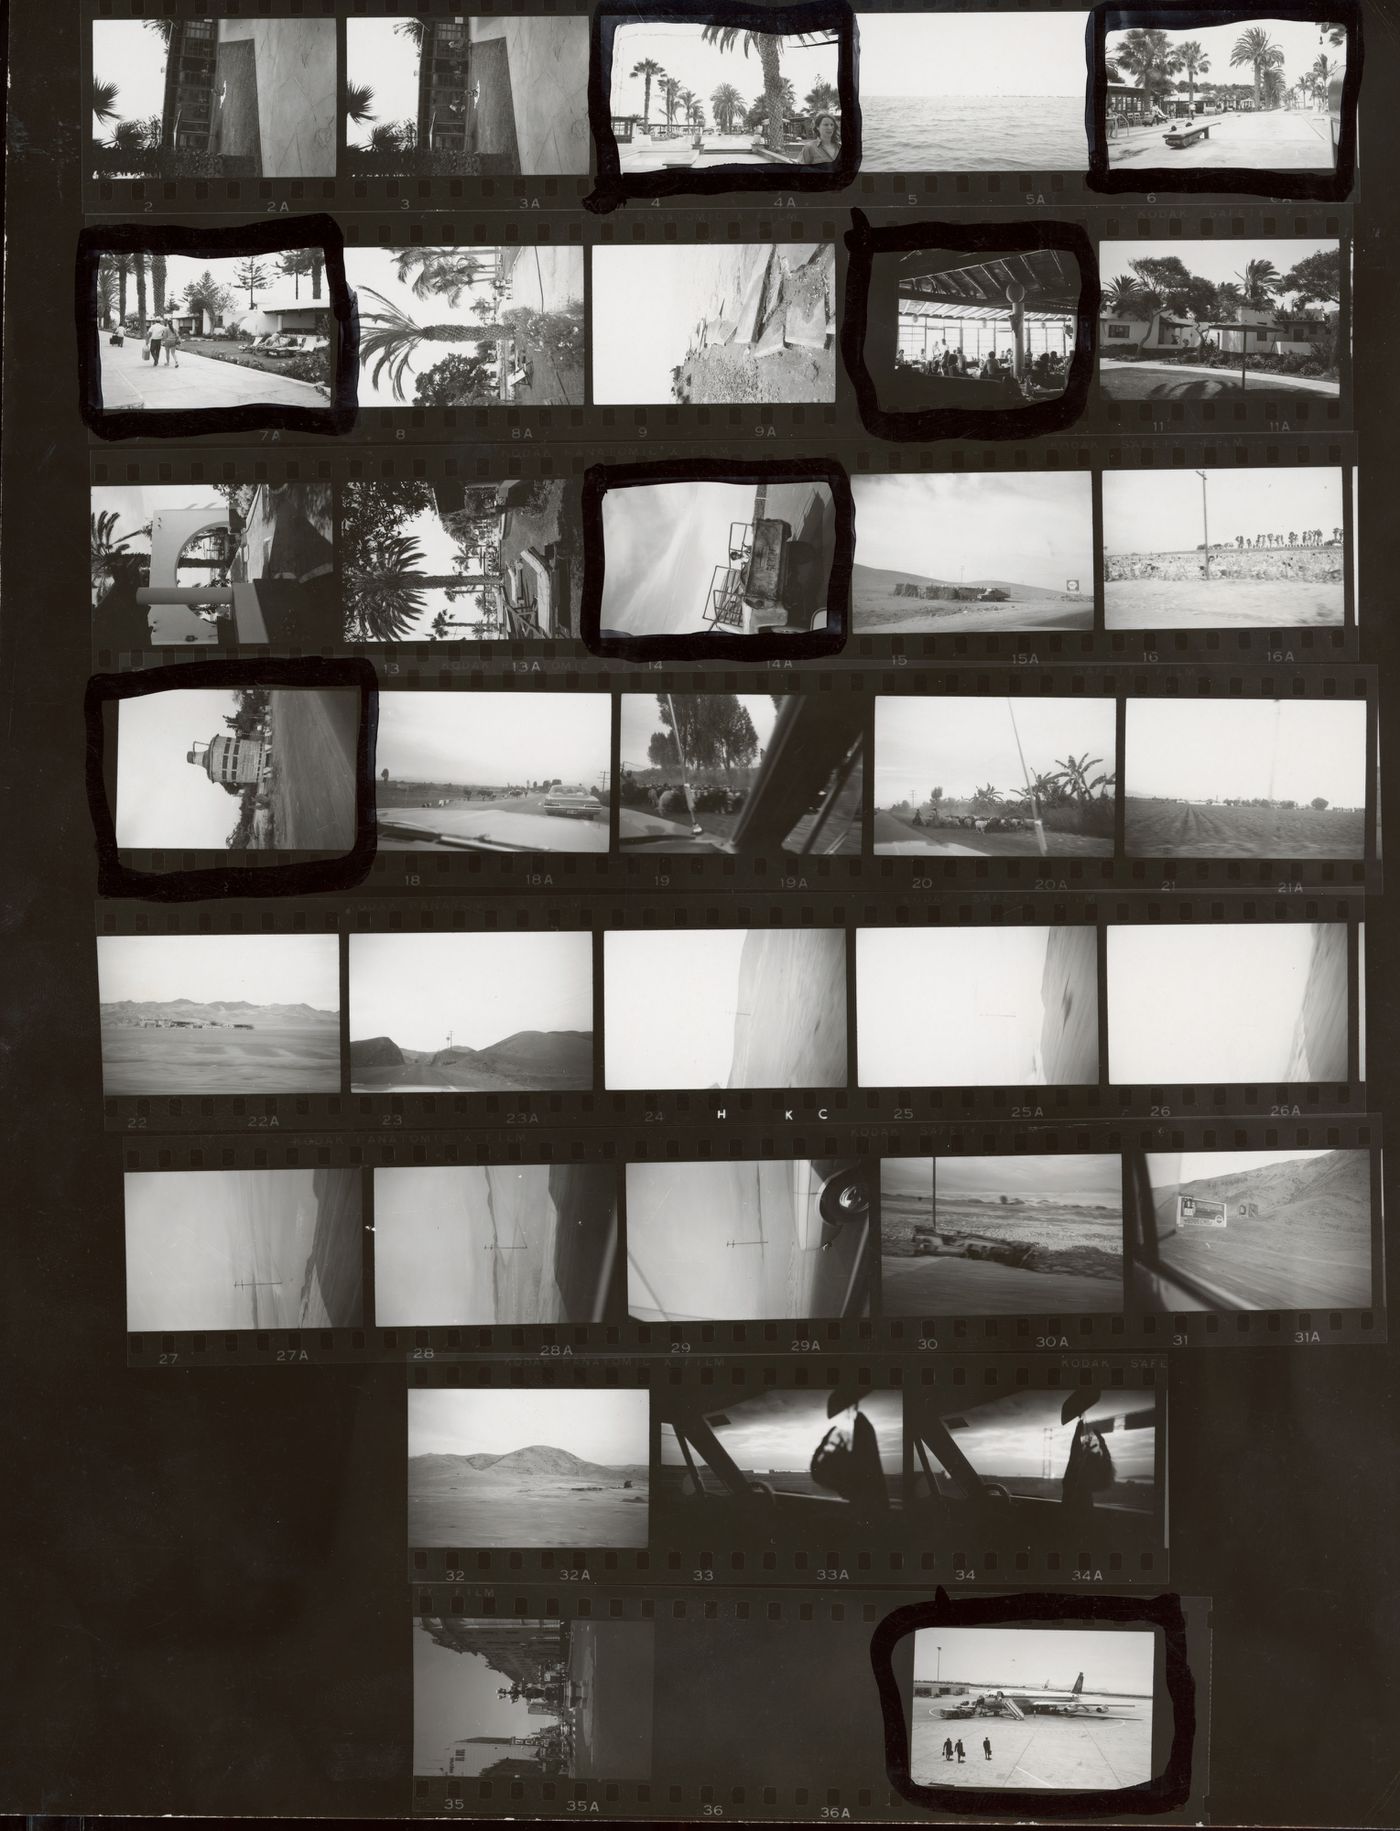 Contact sheet of landscape views, buildings and airplane, South America